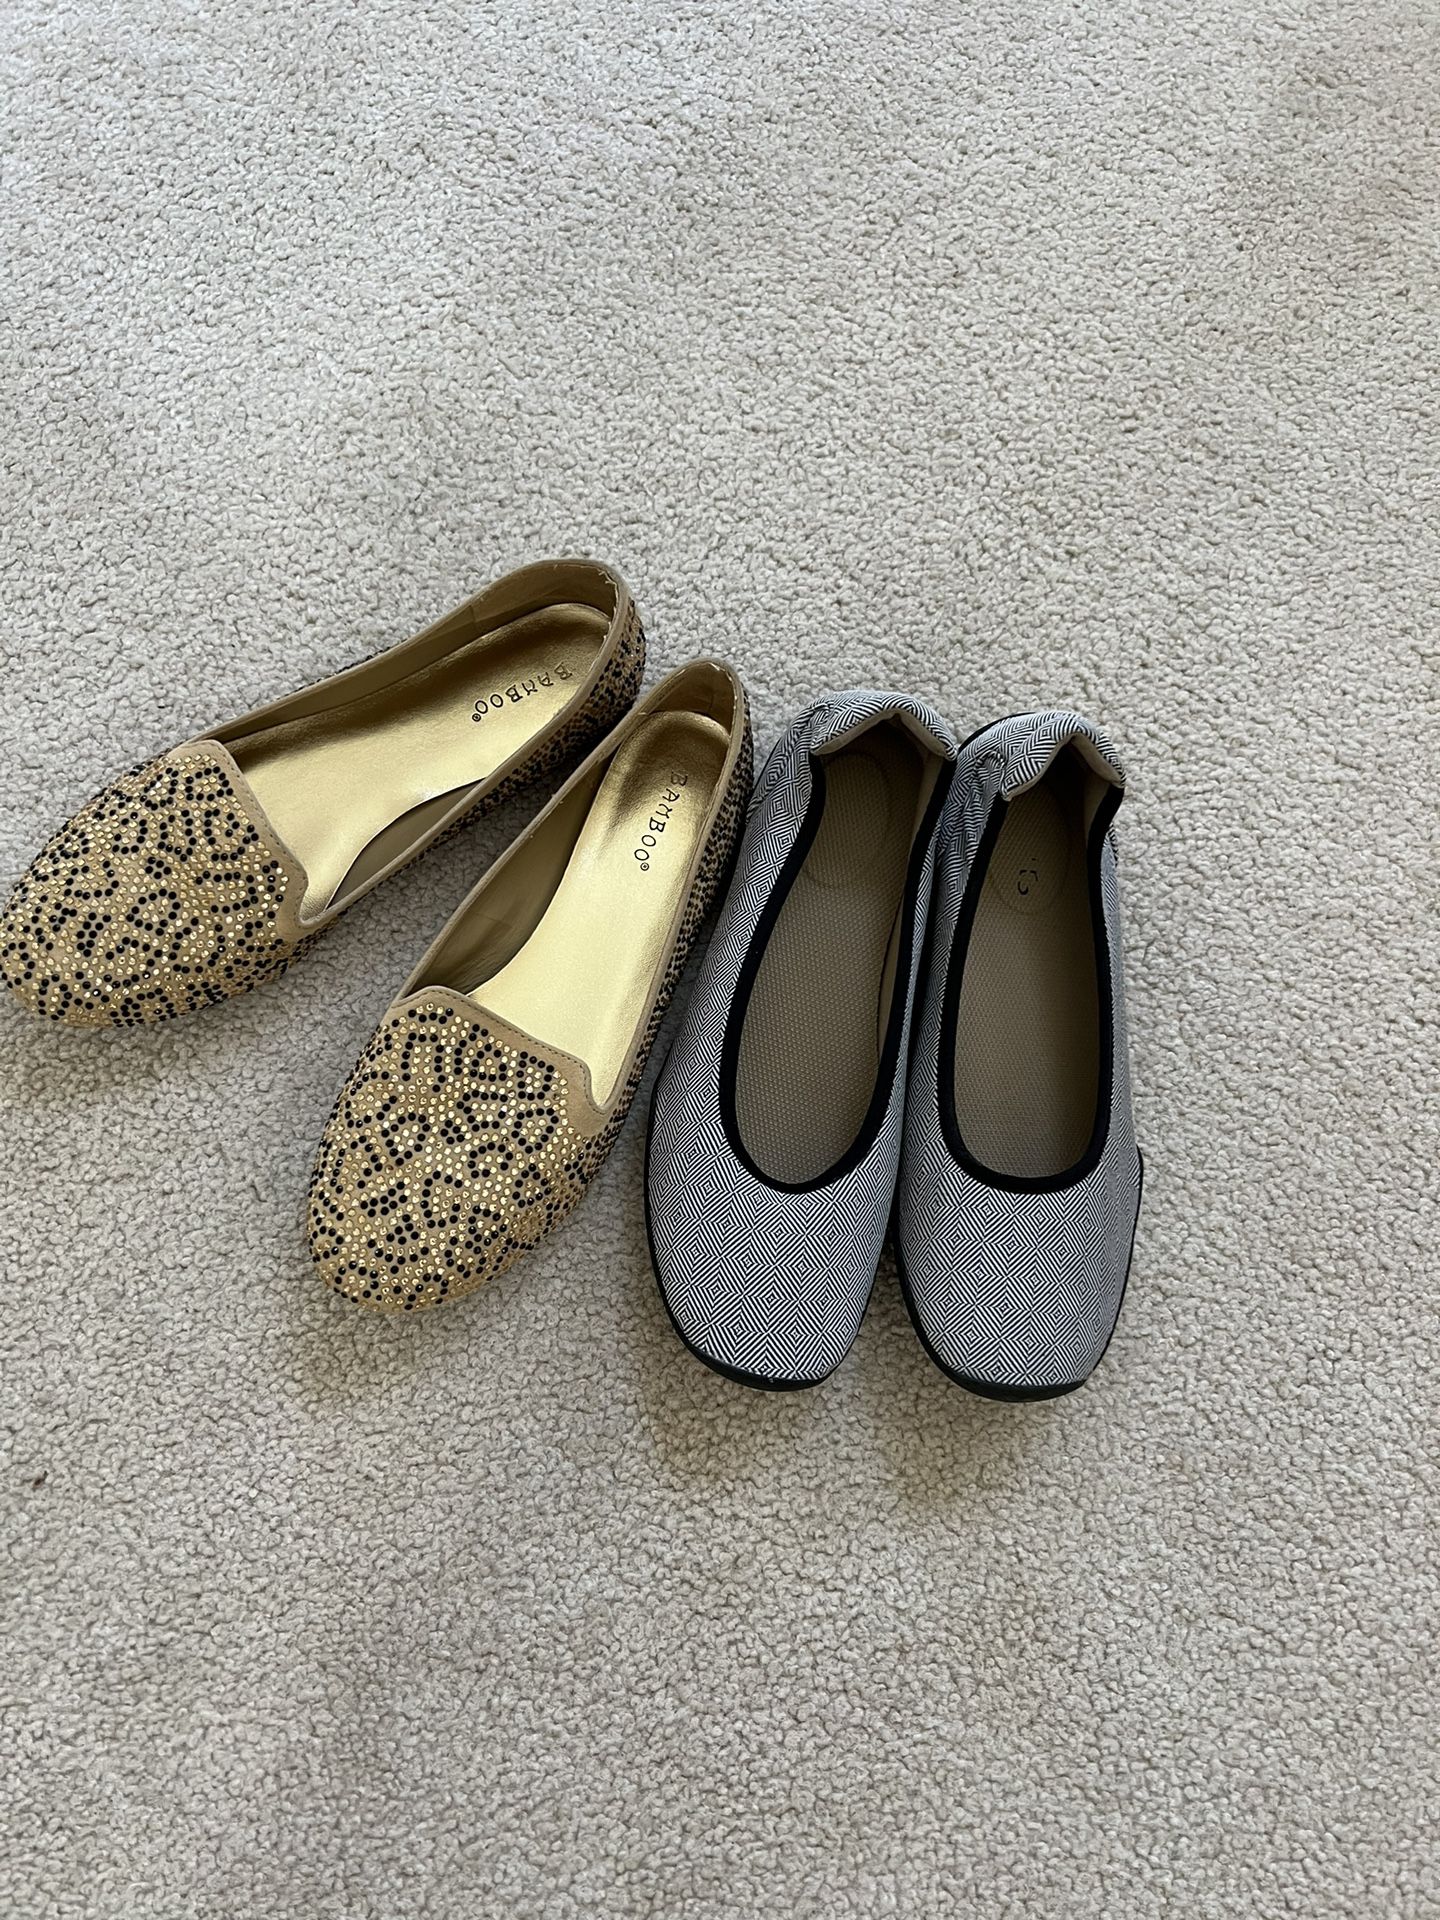 Ladies Size 8 Shoes - Both Pair Like New